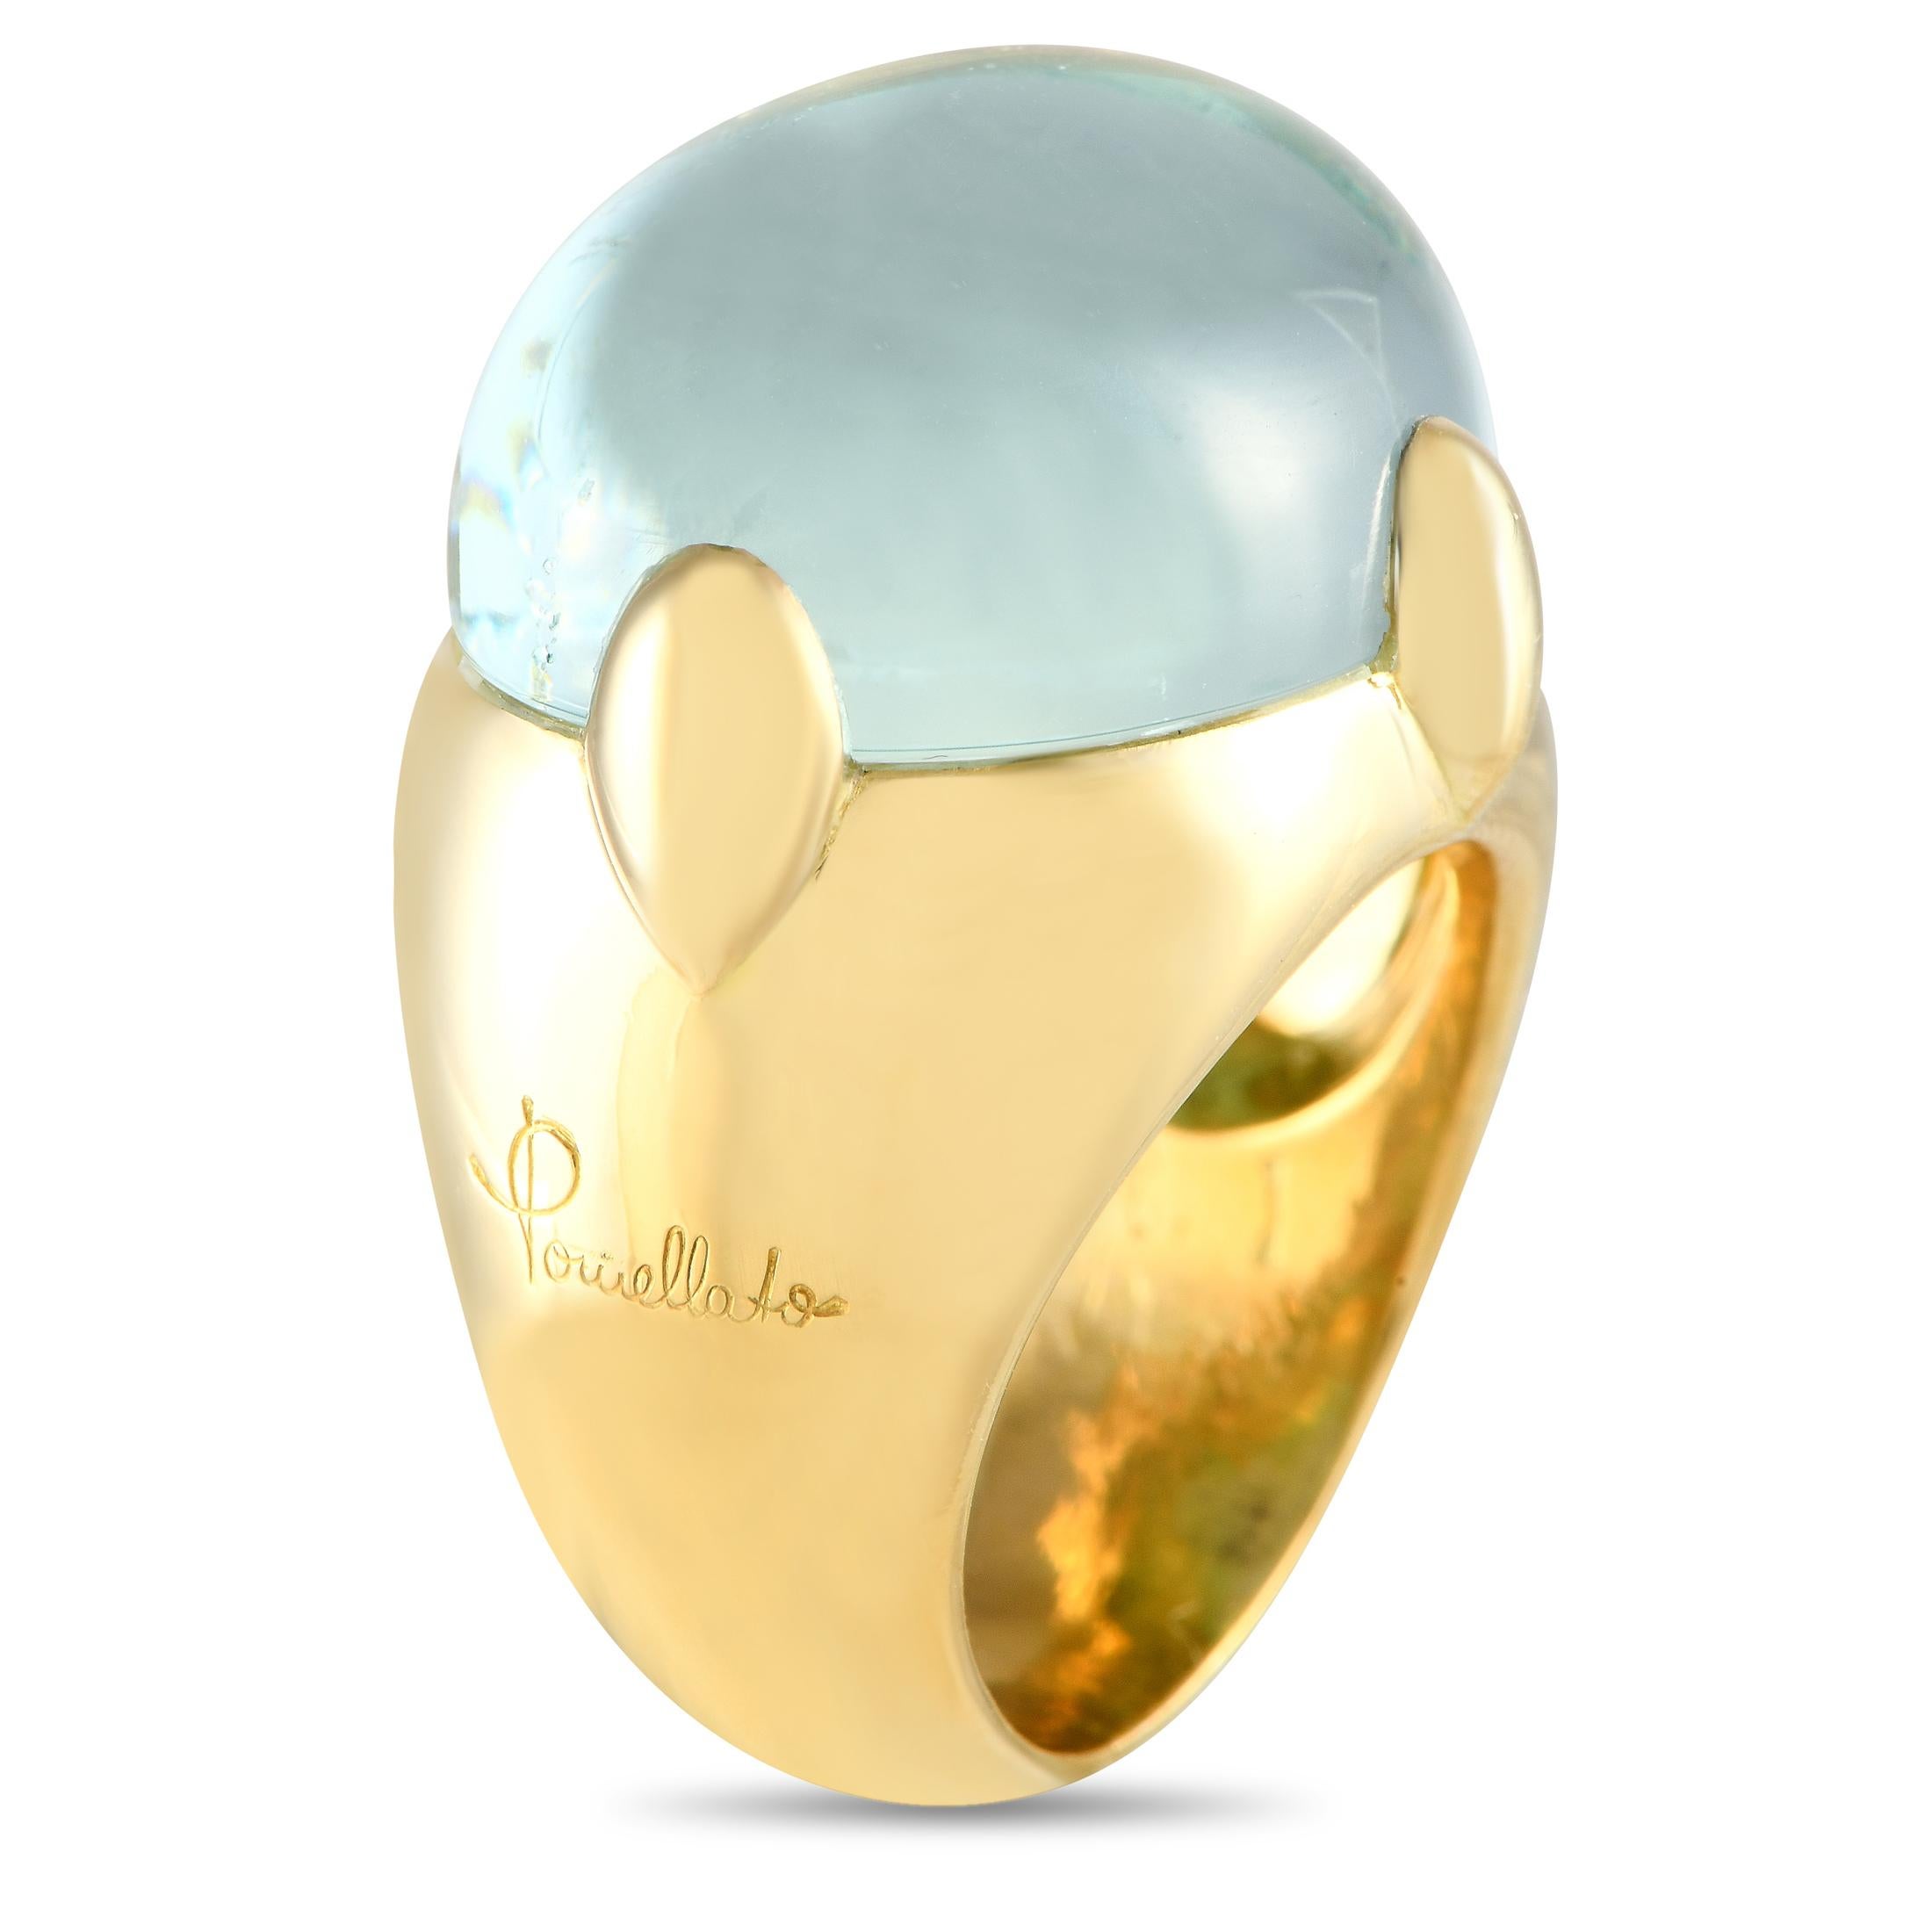 At the center of this exquisite 18K yellow gold Pomellato ring, a breathtaking aquamarine gemstone takes center stage. Simple, elegant, and impossible to ignore, this ring features an 8mm wide band and a bold 12mm top height.This jewelry piece is